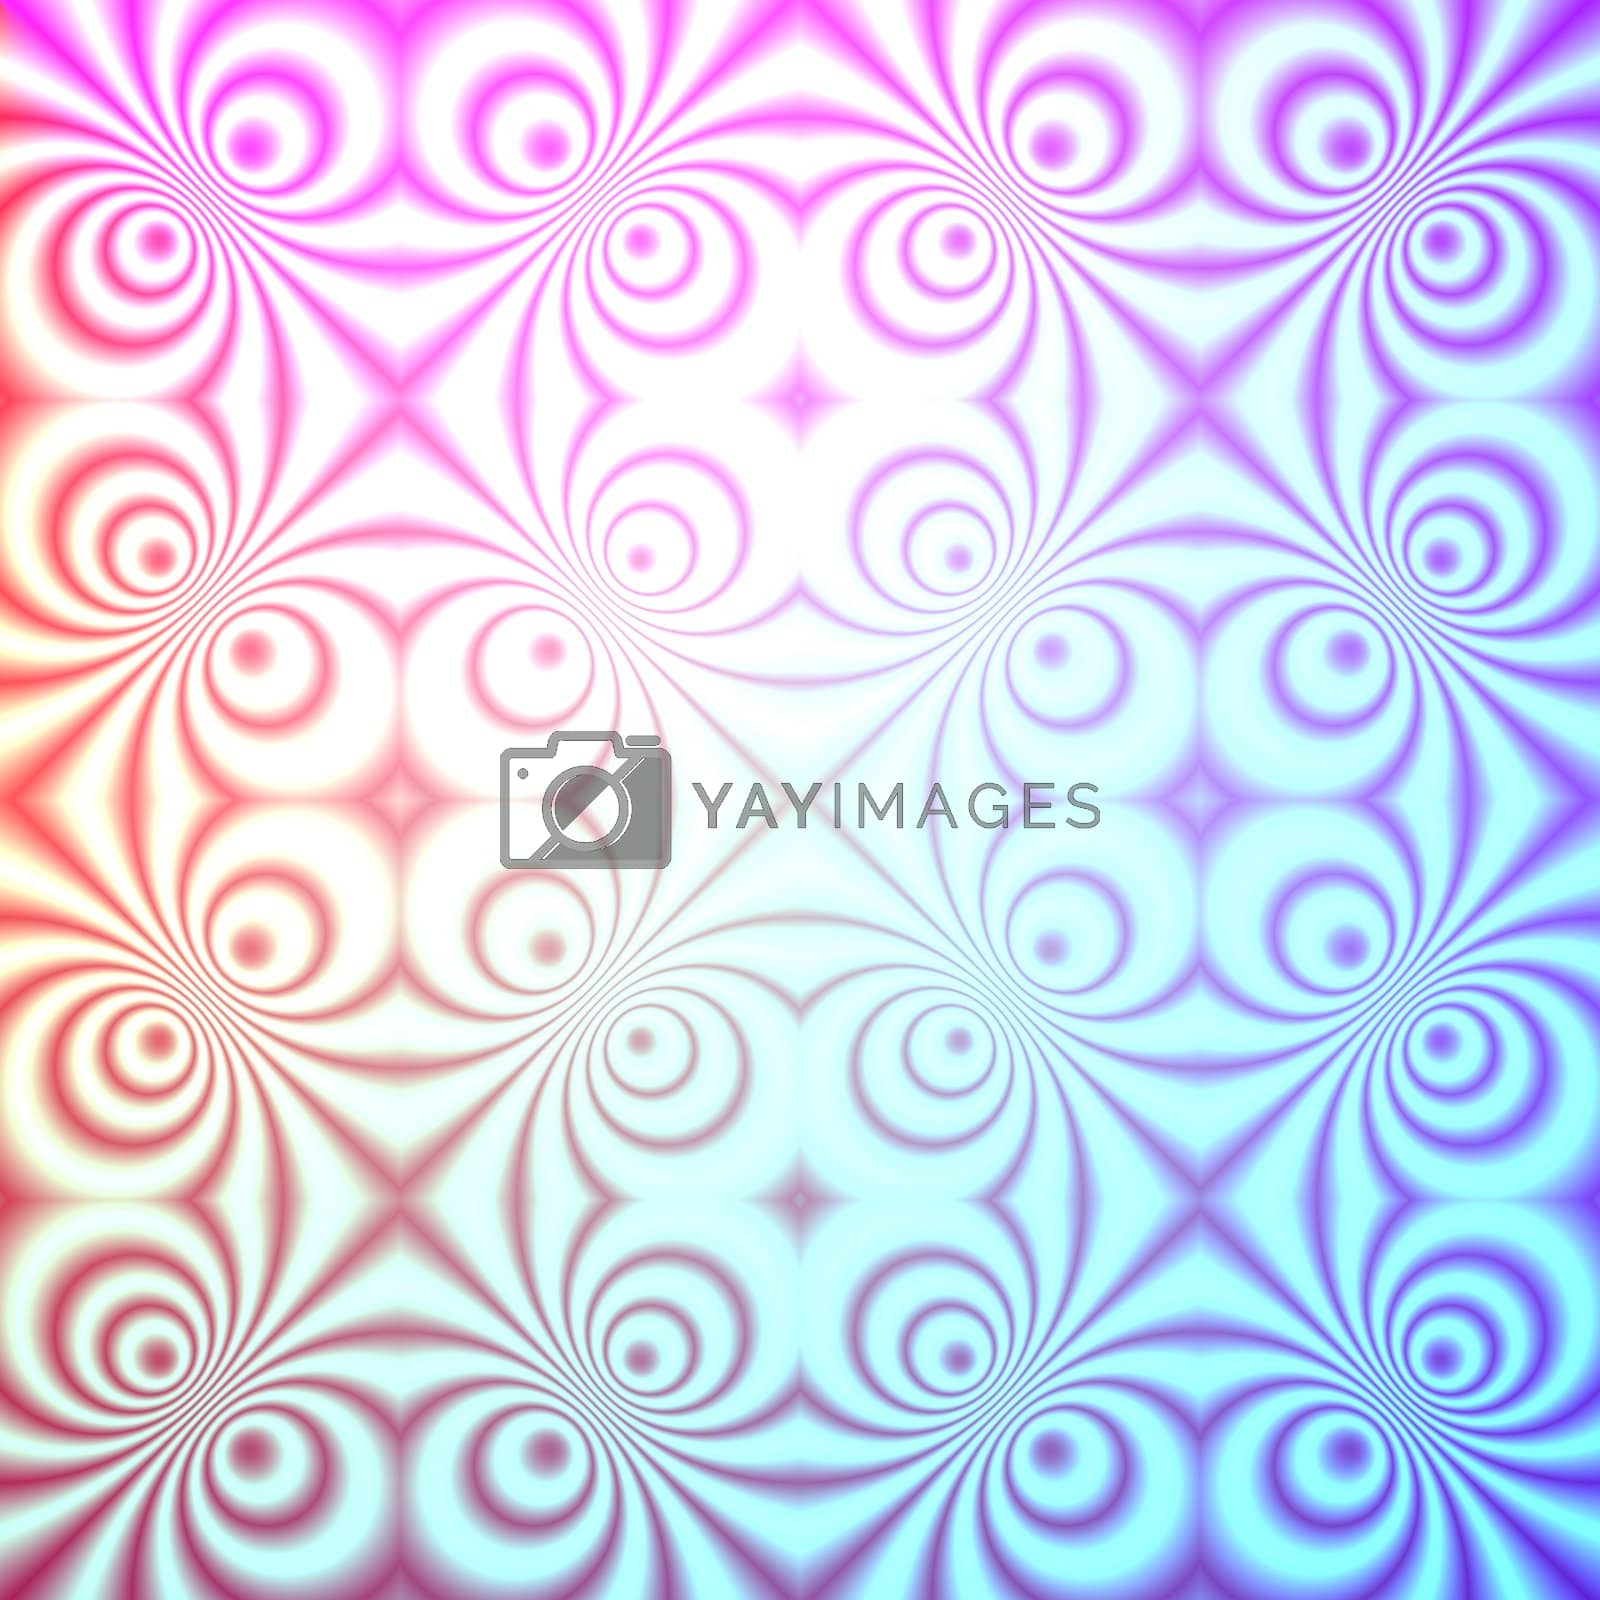 Royalty free image of multi color candy swirl by hospitalera